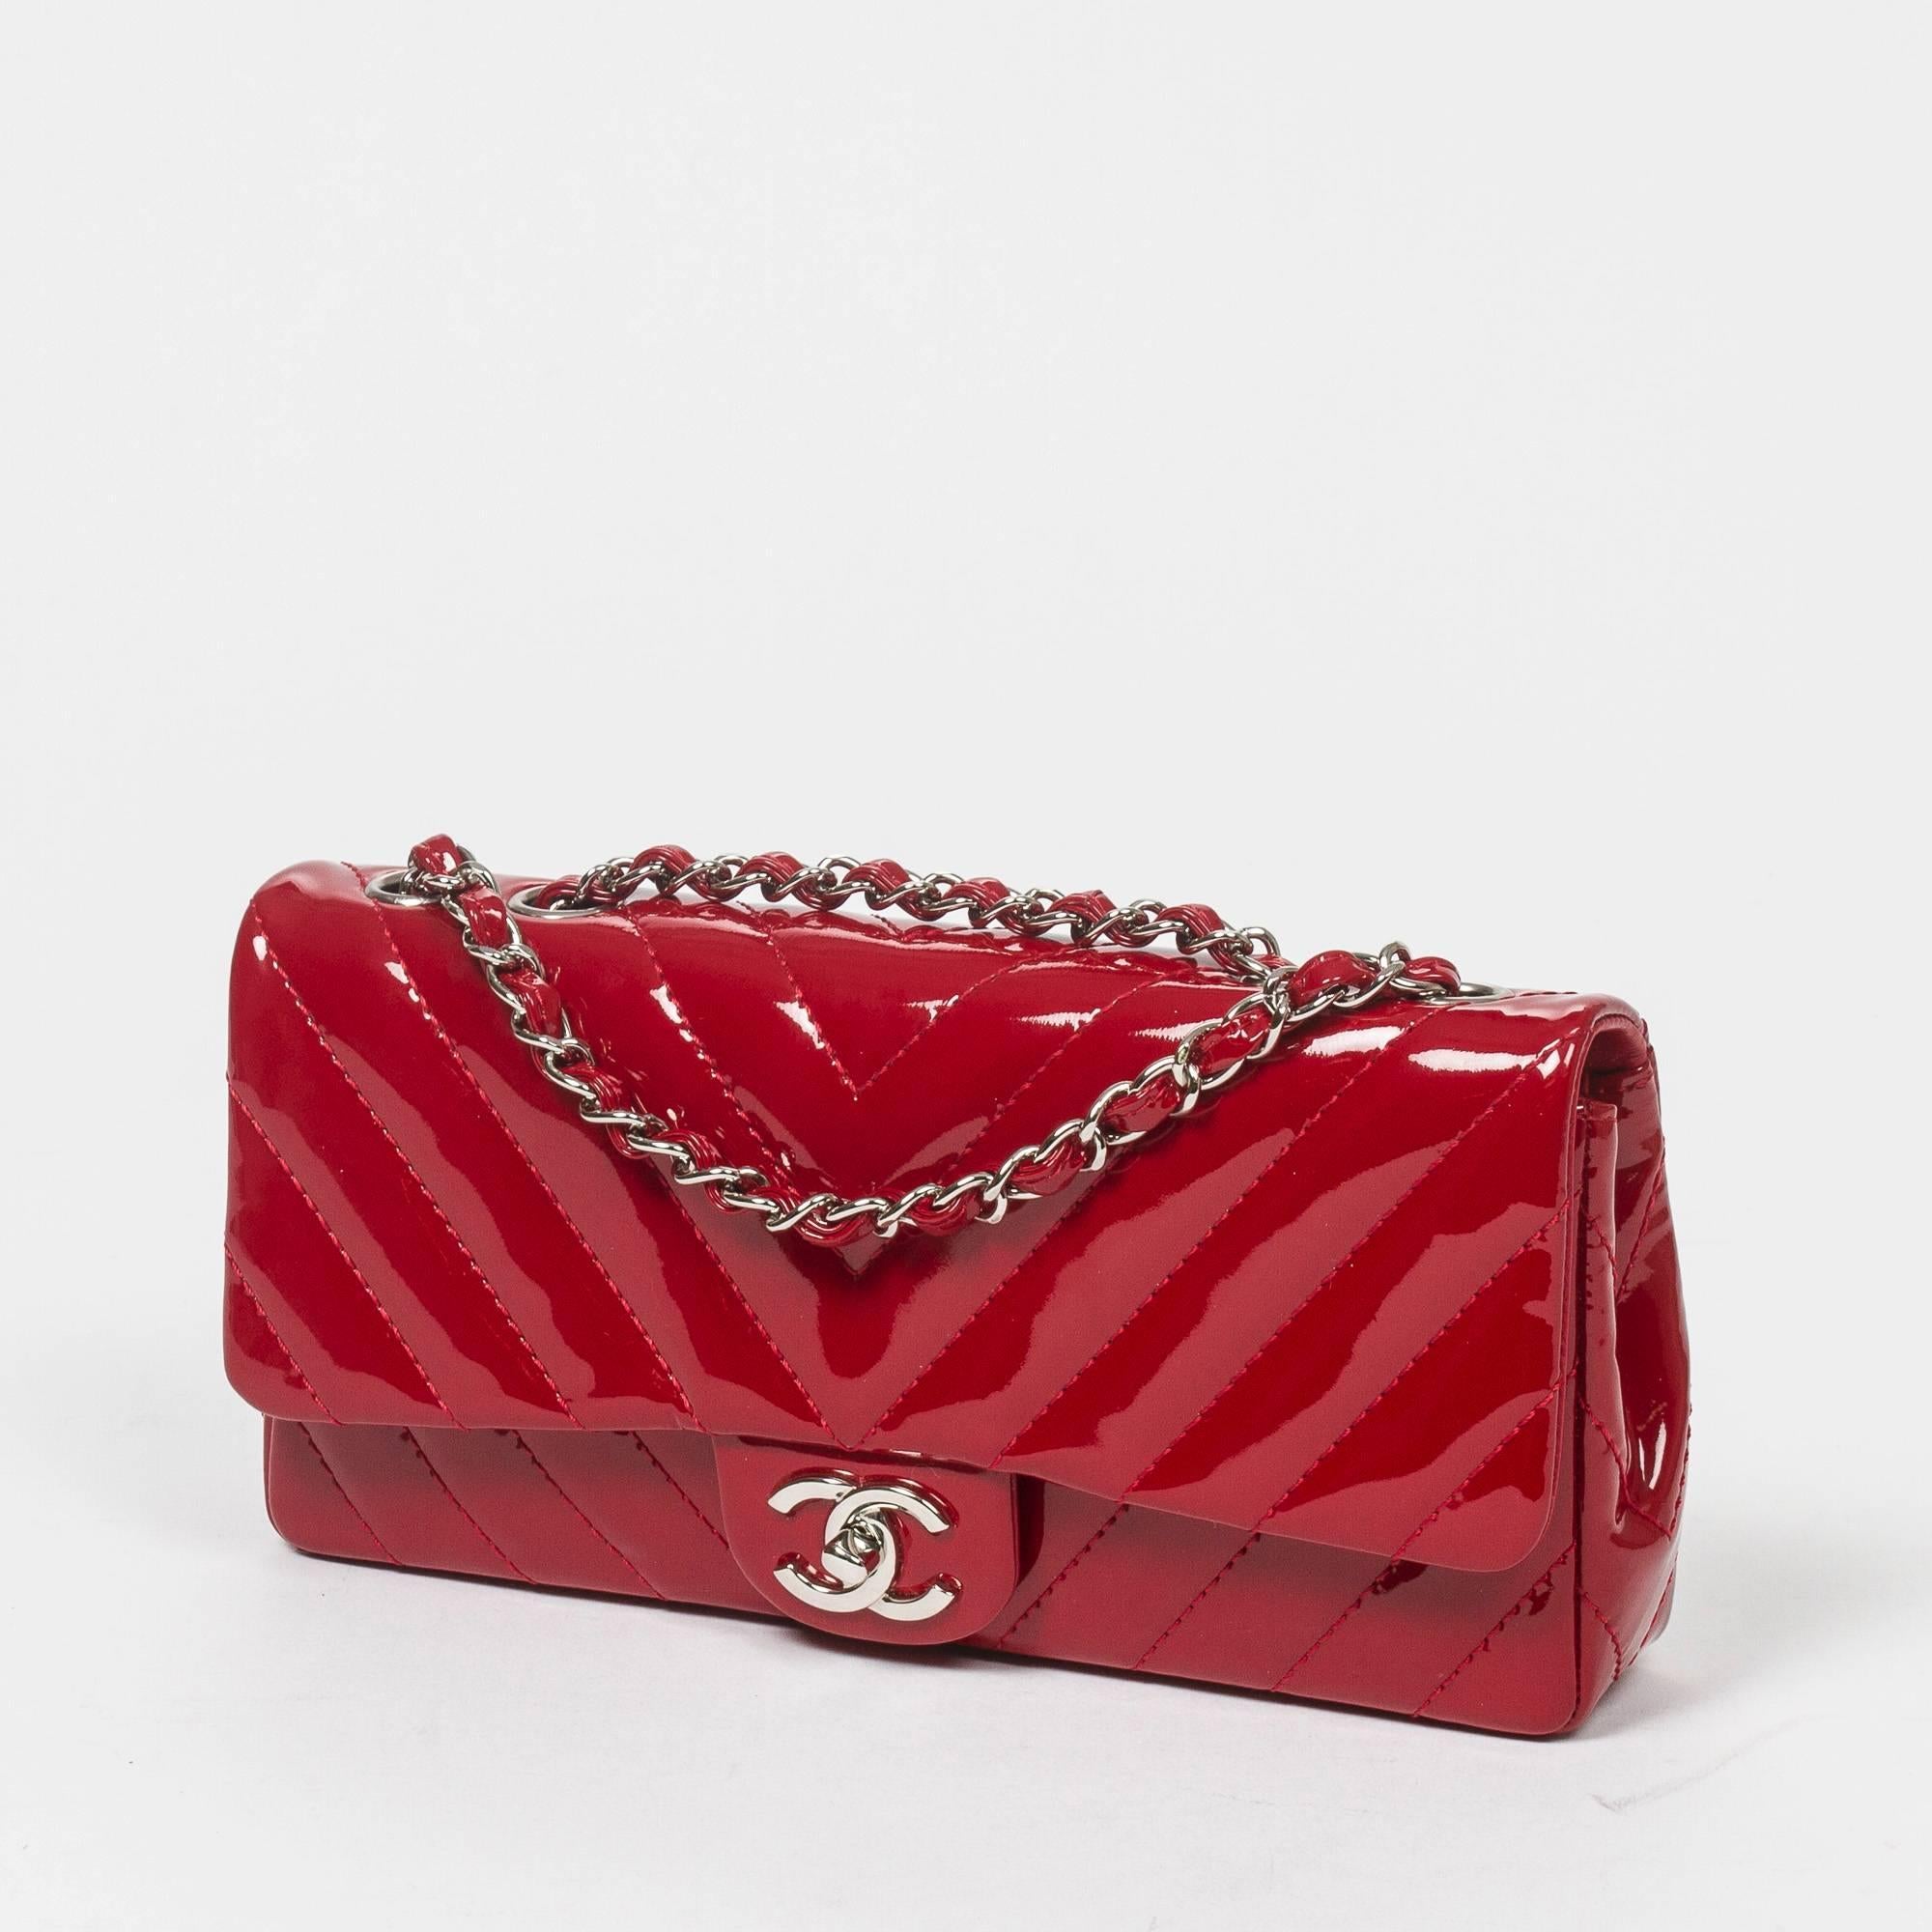 Beautiful East West Flap in deep red chevron quilted patent leather, double chain strap interlaced with red patent leather, signature turnlock, silver tone hardware. Back slip pocket. Red leather lined interior with 3 compartments. Silver tone